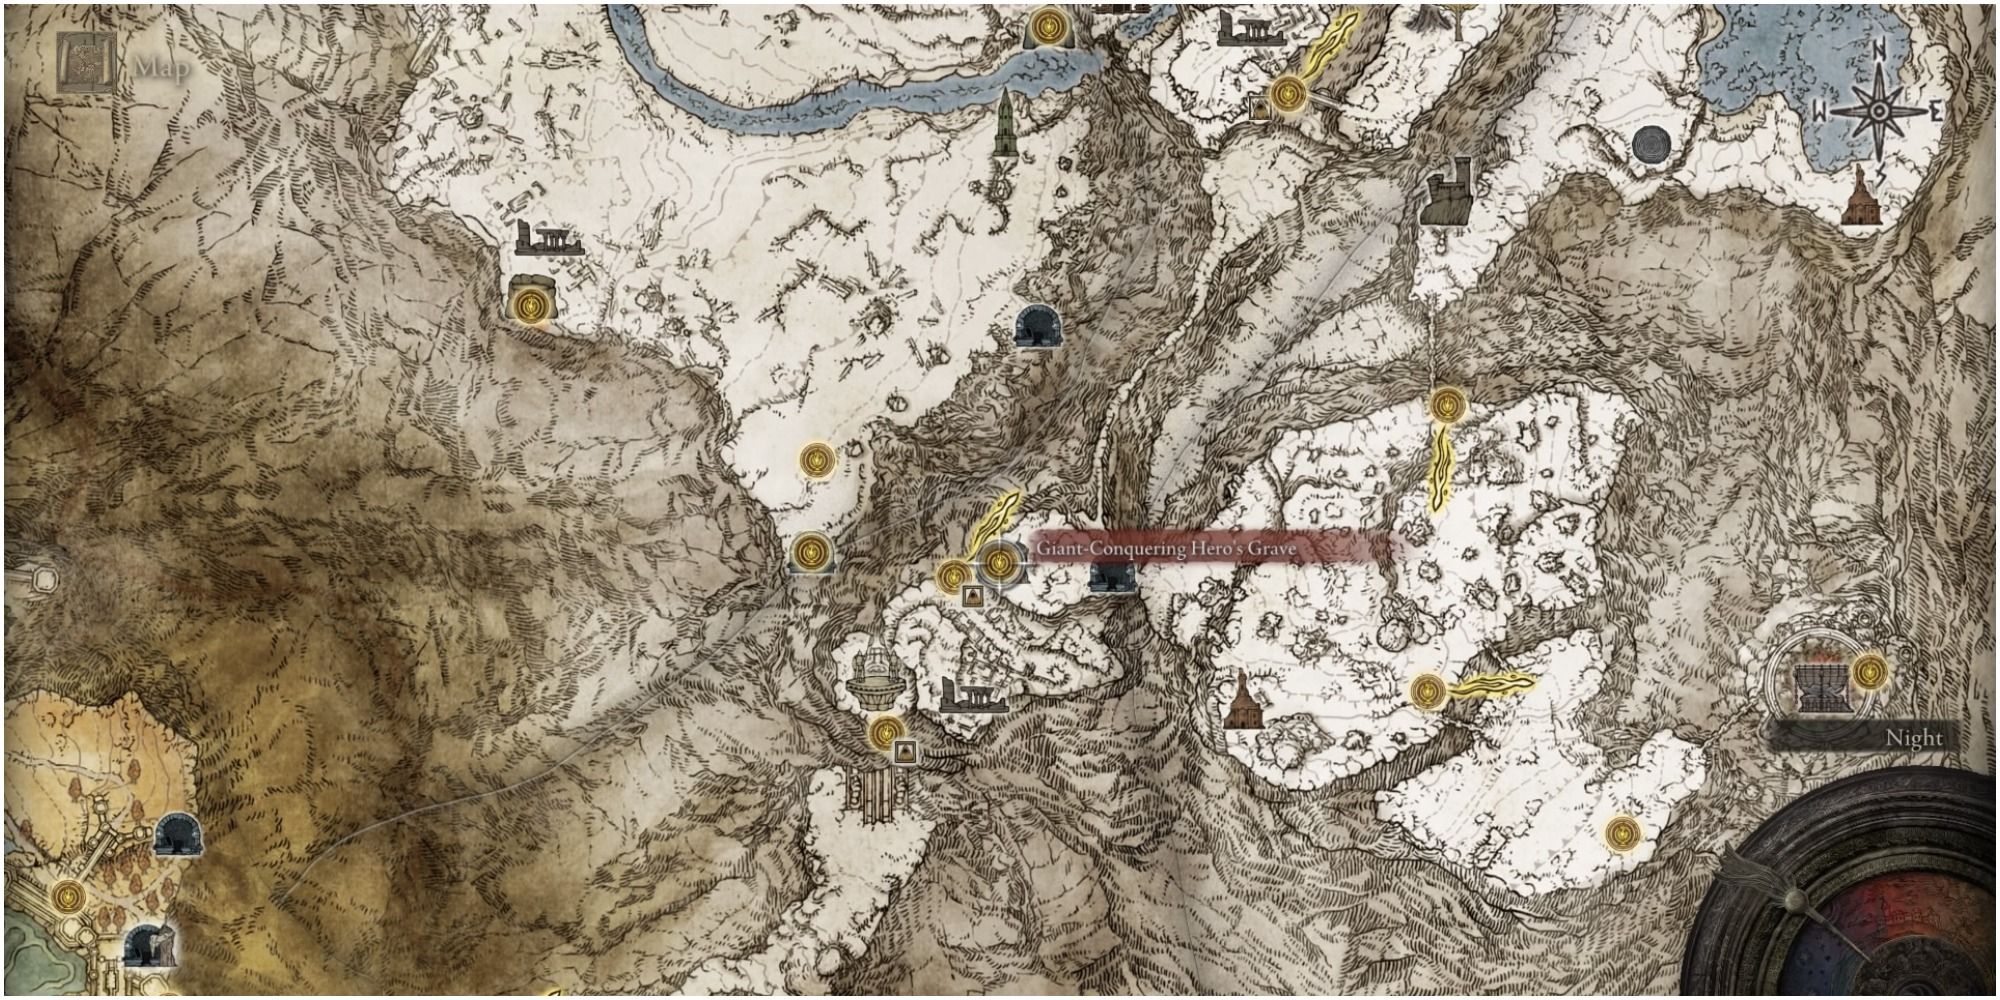 The map showing the location of Giant-Conquering Hero's Grave.